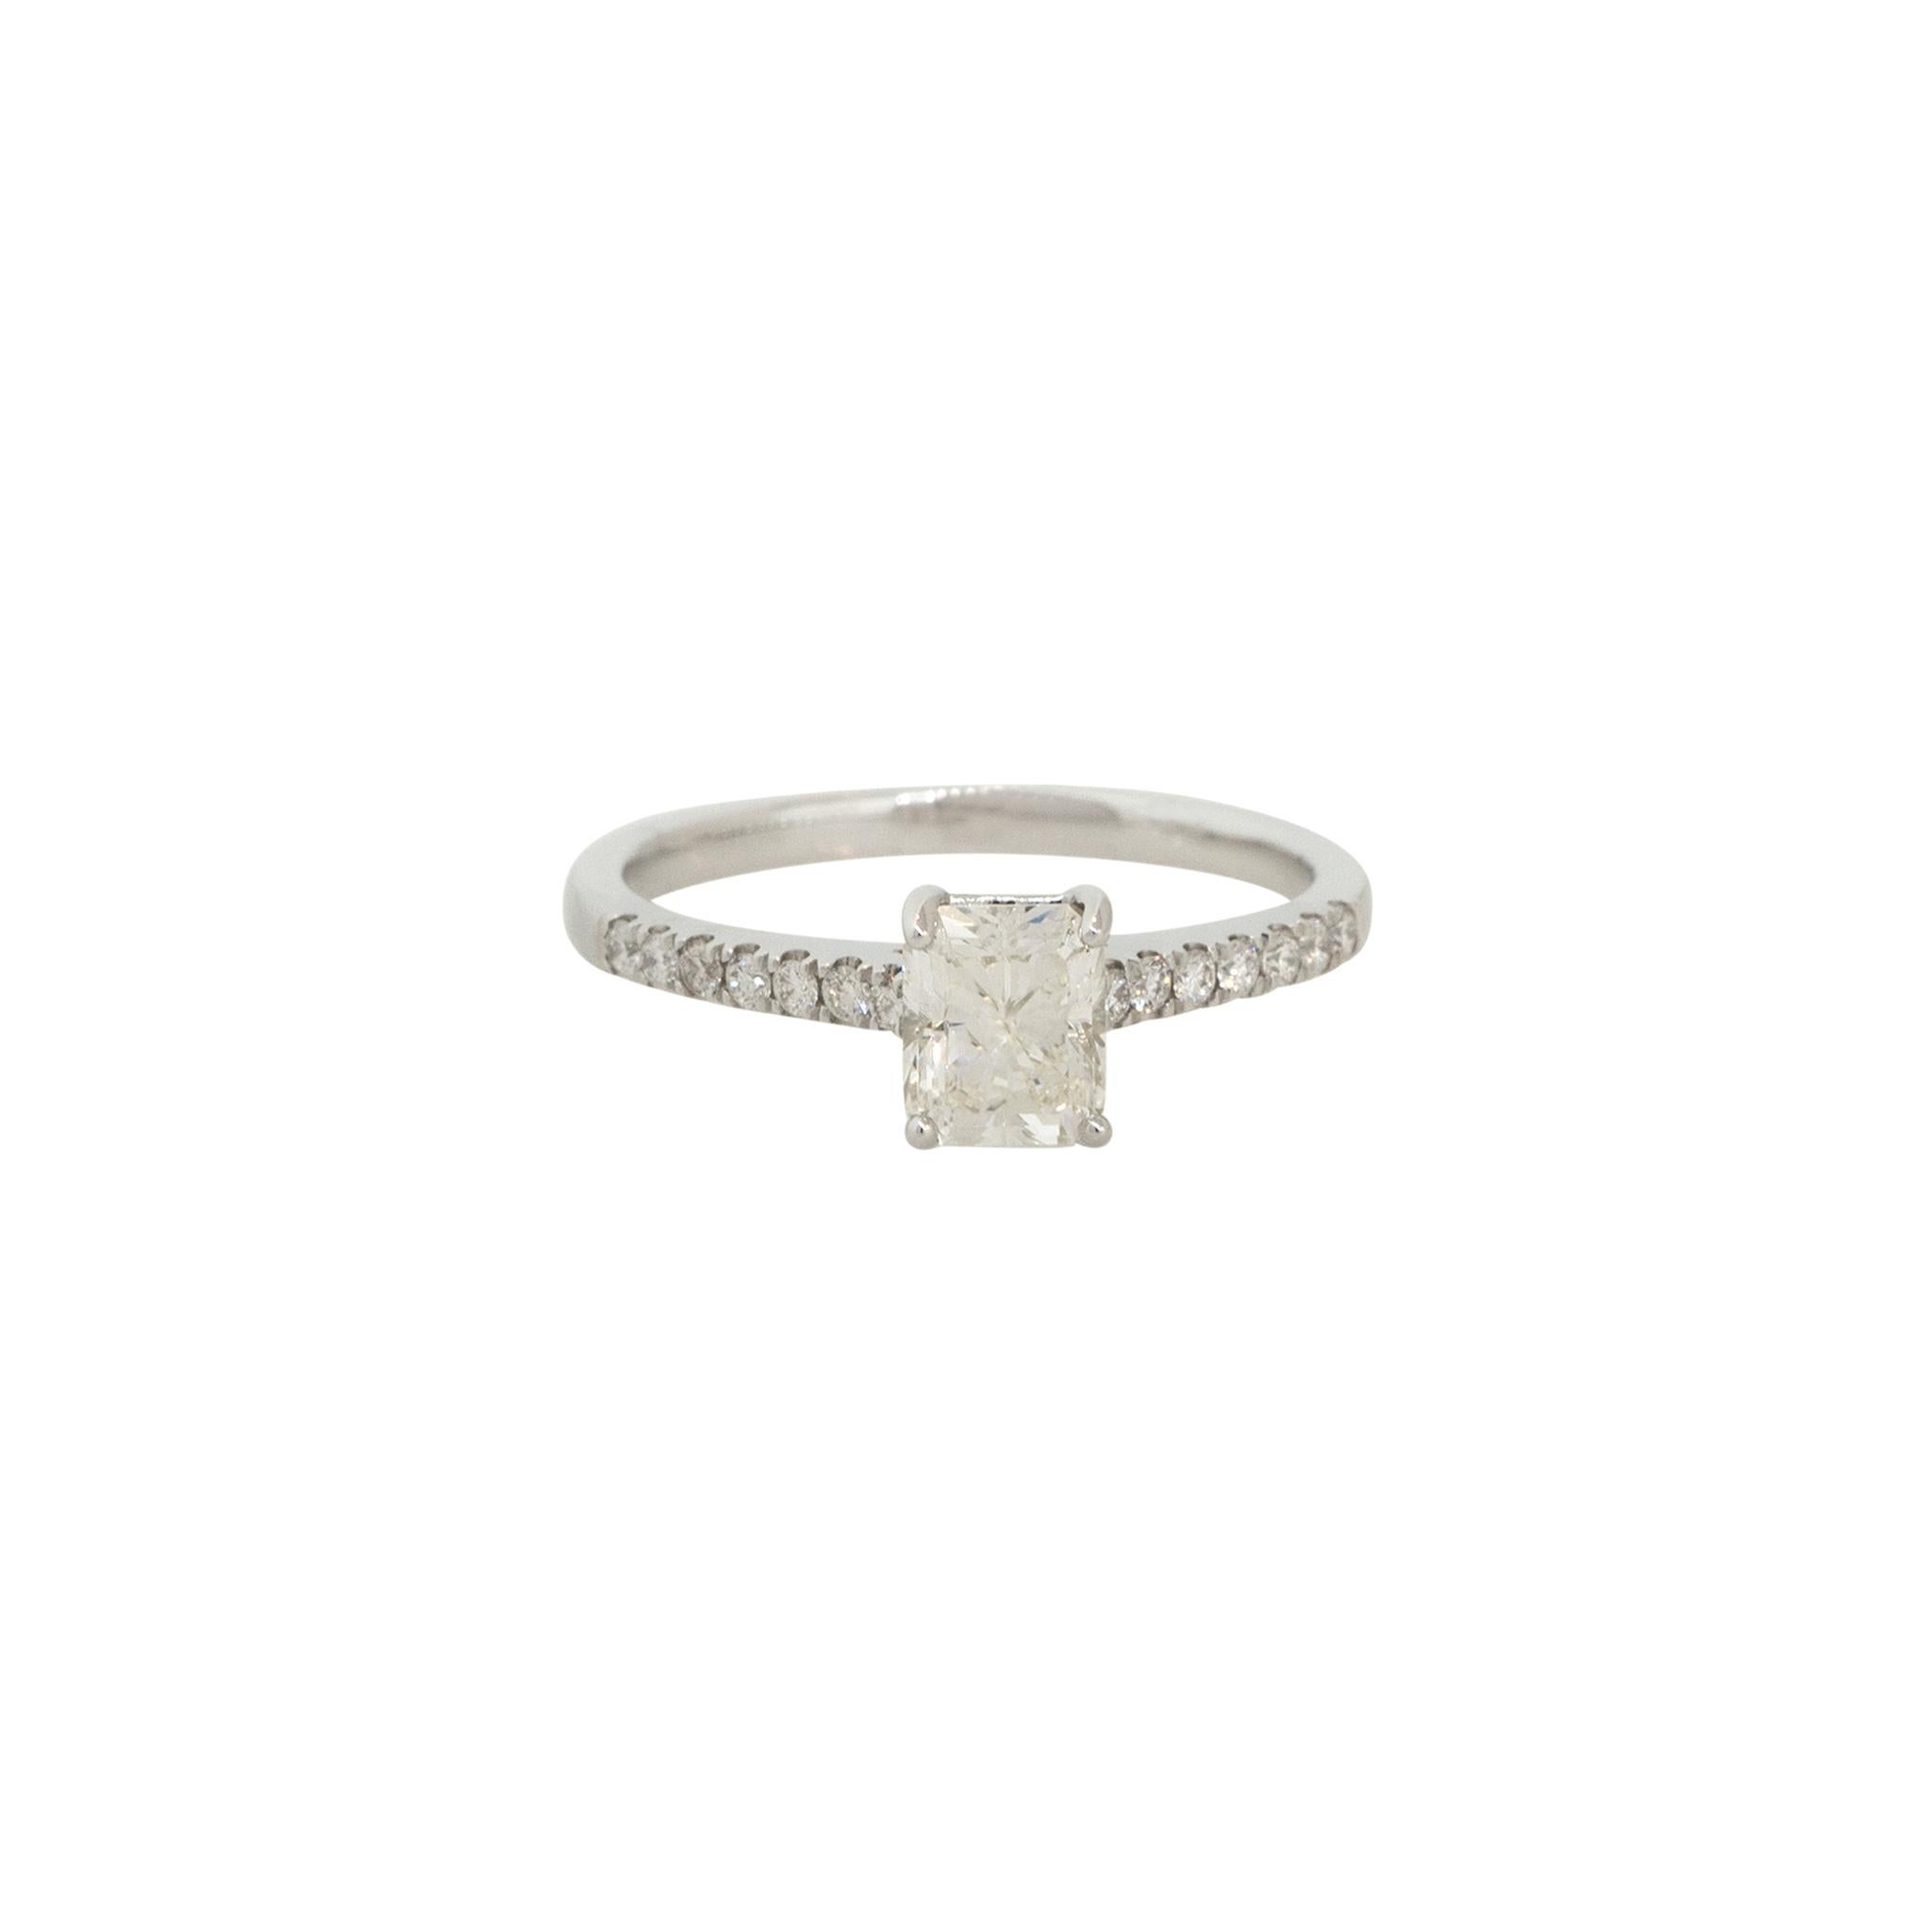 GIA Certified 18k White Gold 1.17ctw Radiant Cut Diamond Engagement Ring

Raymond Lee Jewelers in Boca Raton -- South Florida’s destination for diamonds, fine jewelry, antique jewelry, estate pieces, and vintage jewels.

Style: Women's 4 Prong